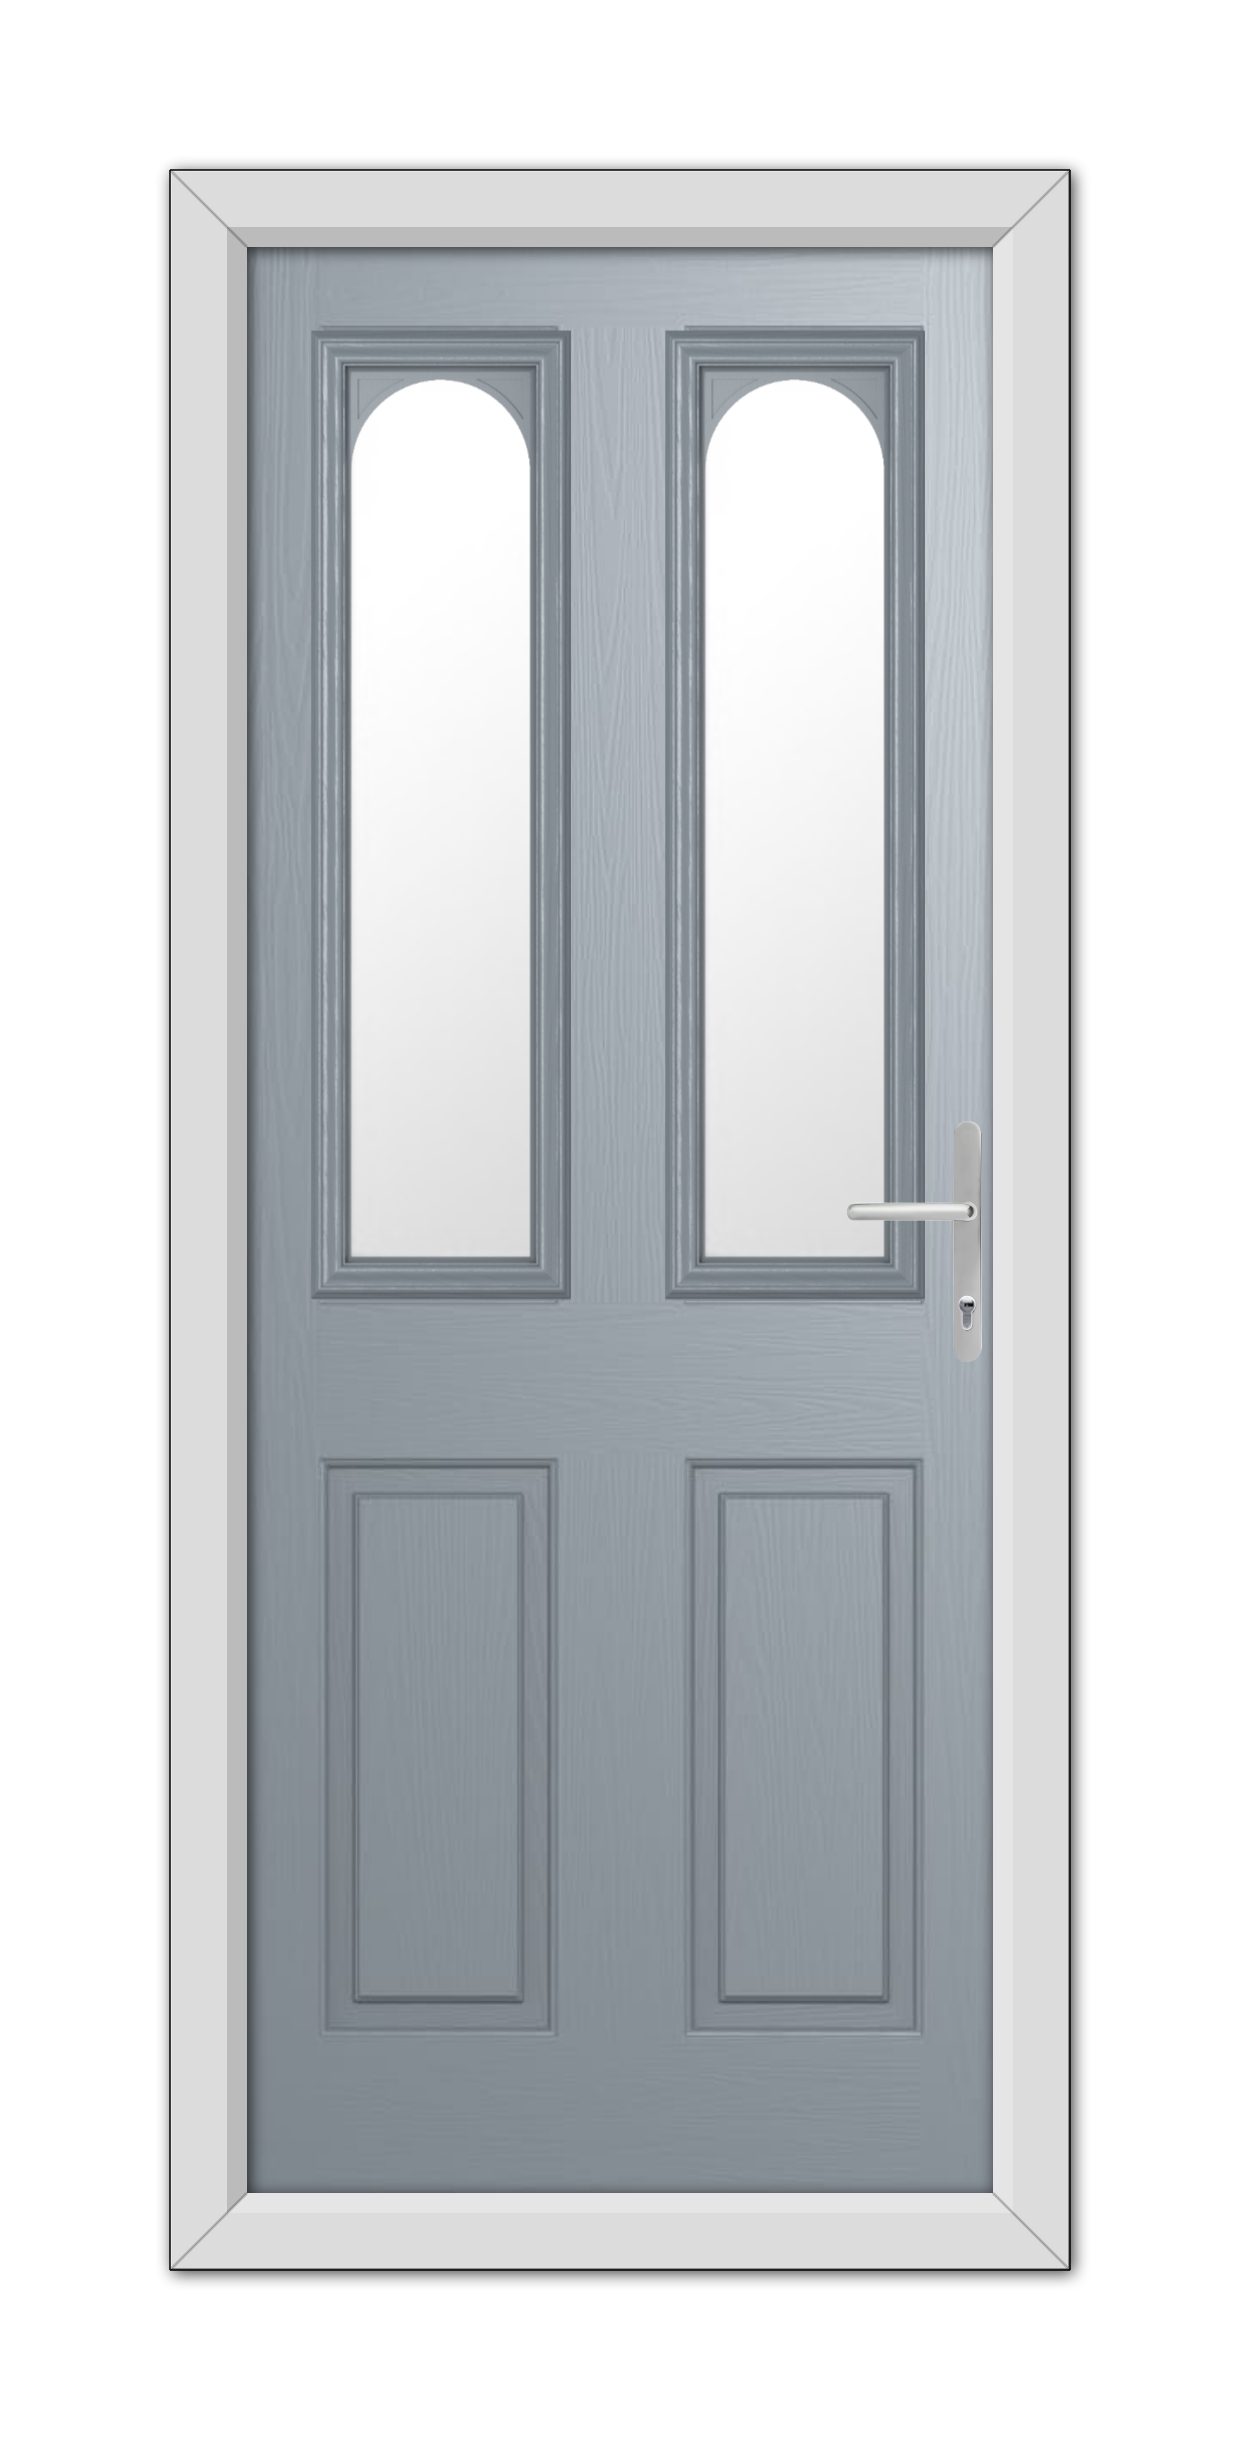 A modern French Grey Elmhurst Composite Door 48mm Timber Core with rectangular glass panels on each side, featuring a white frame and a metallic handle on the right door.